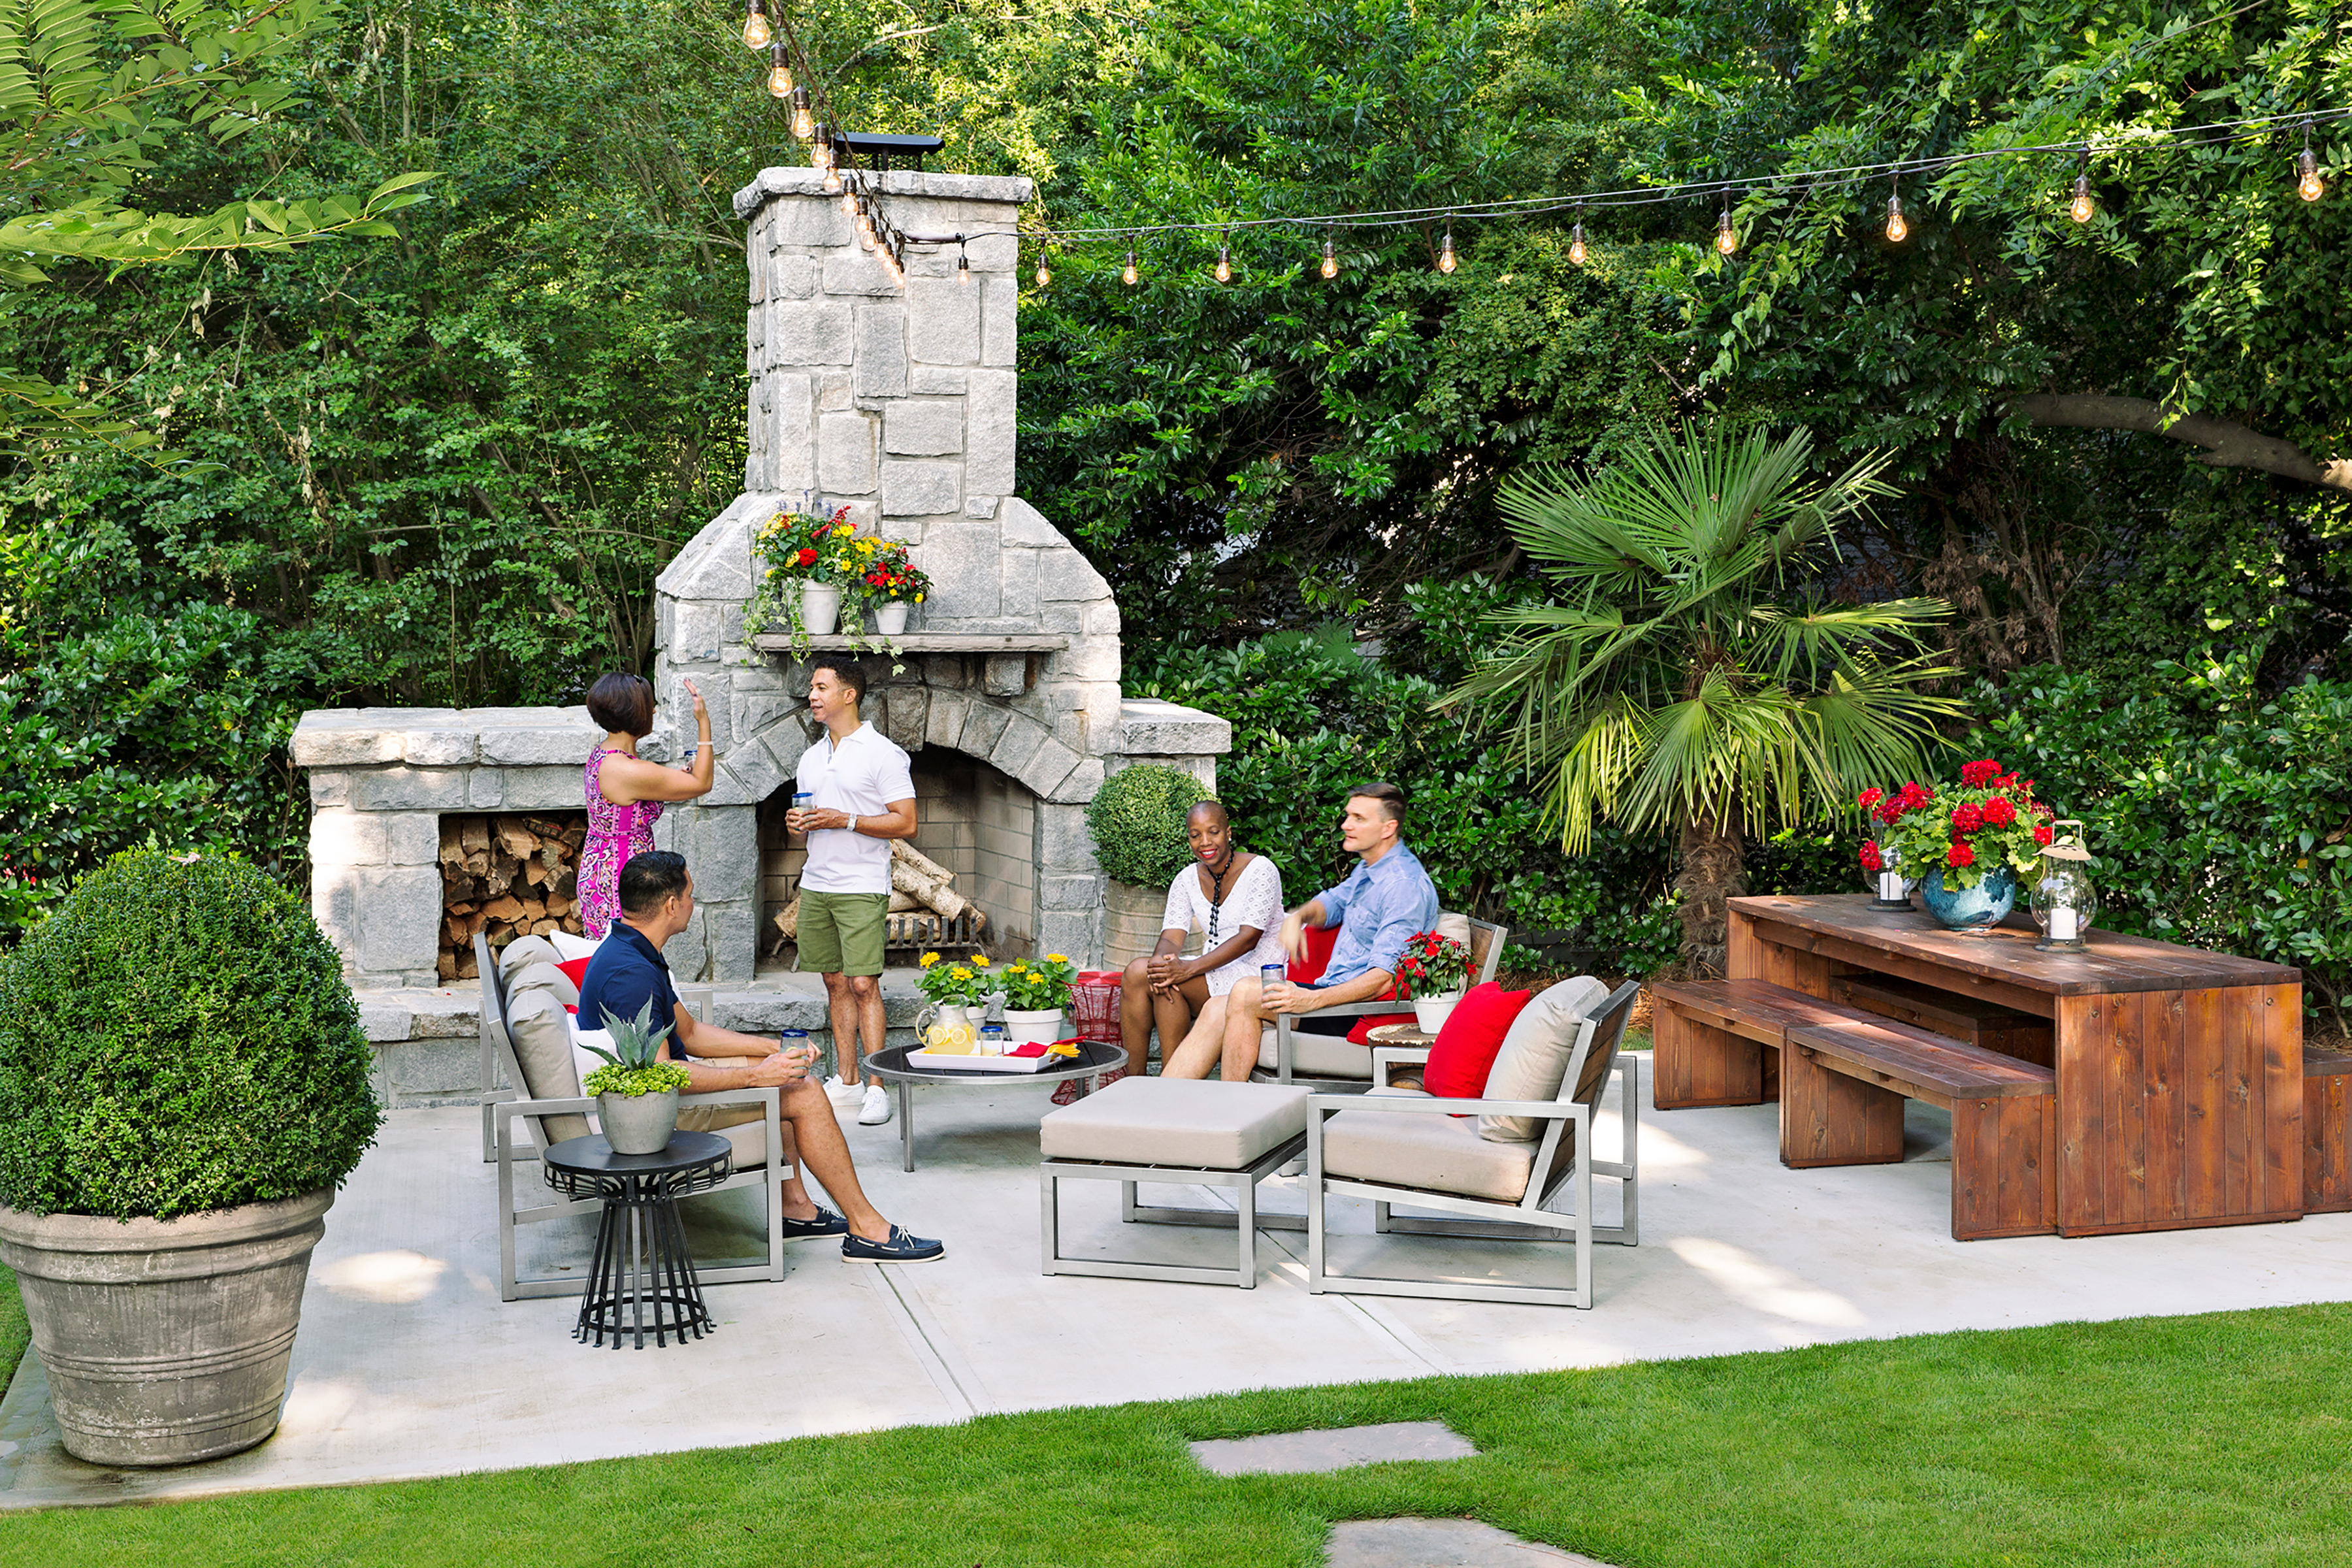 Group of friends in backyard patio in front of fireplace